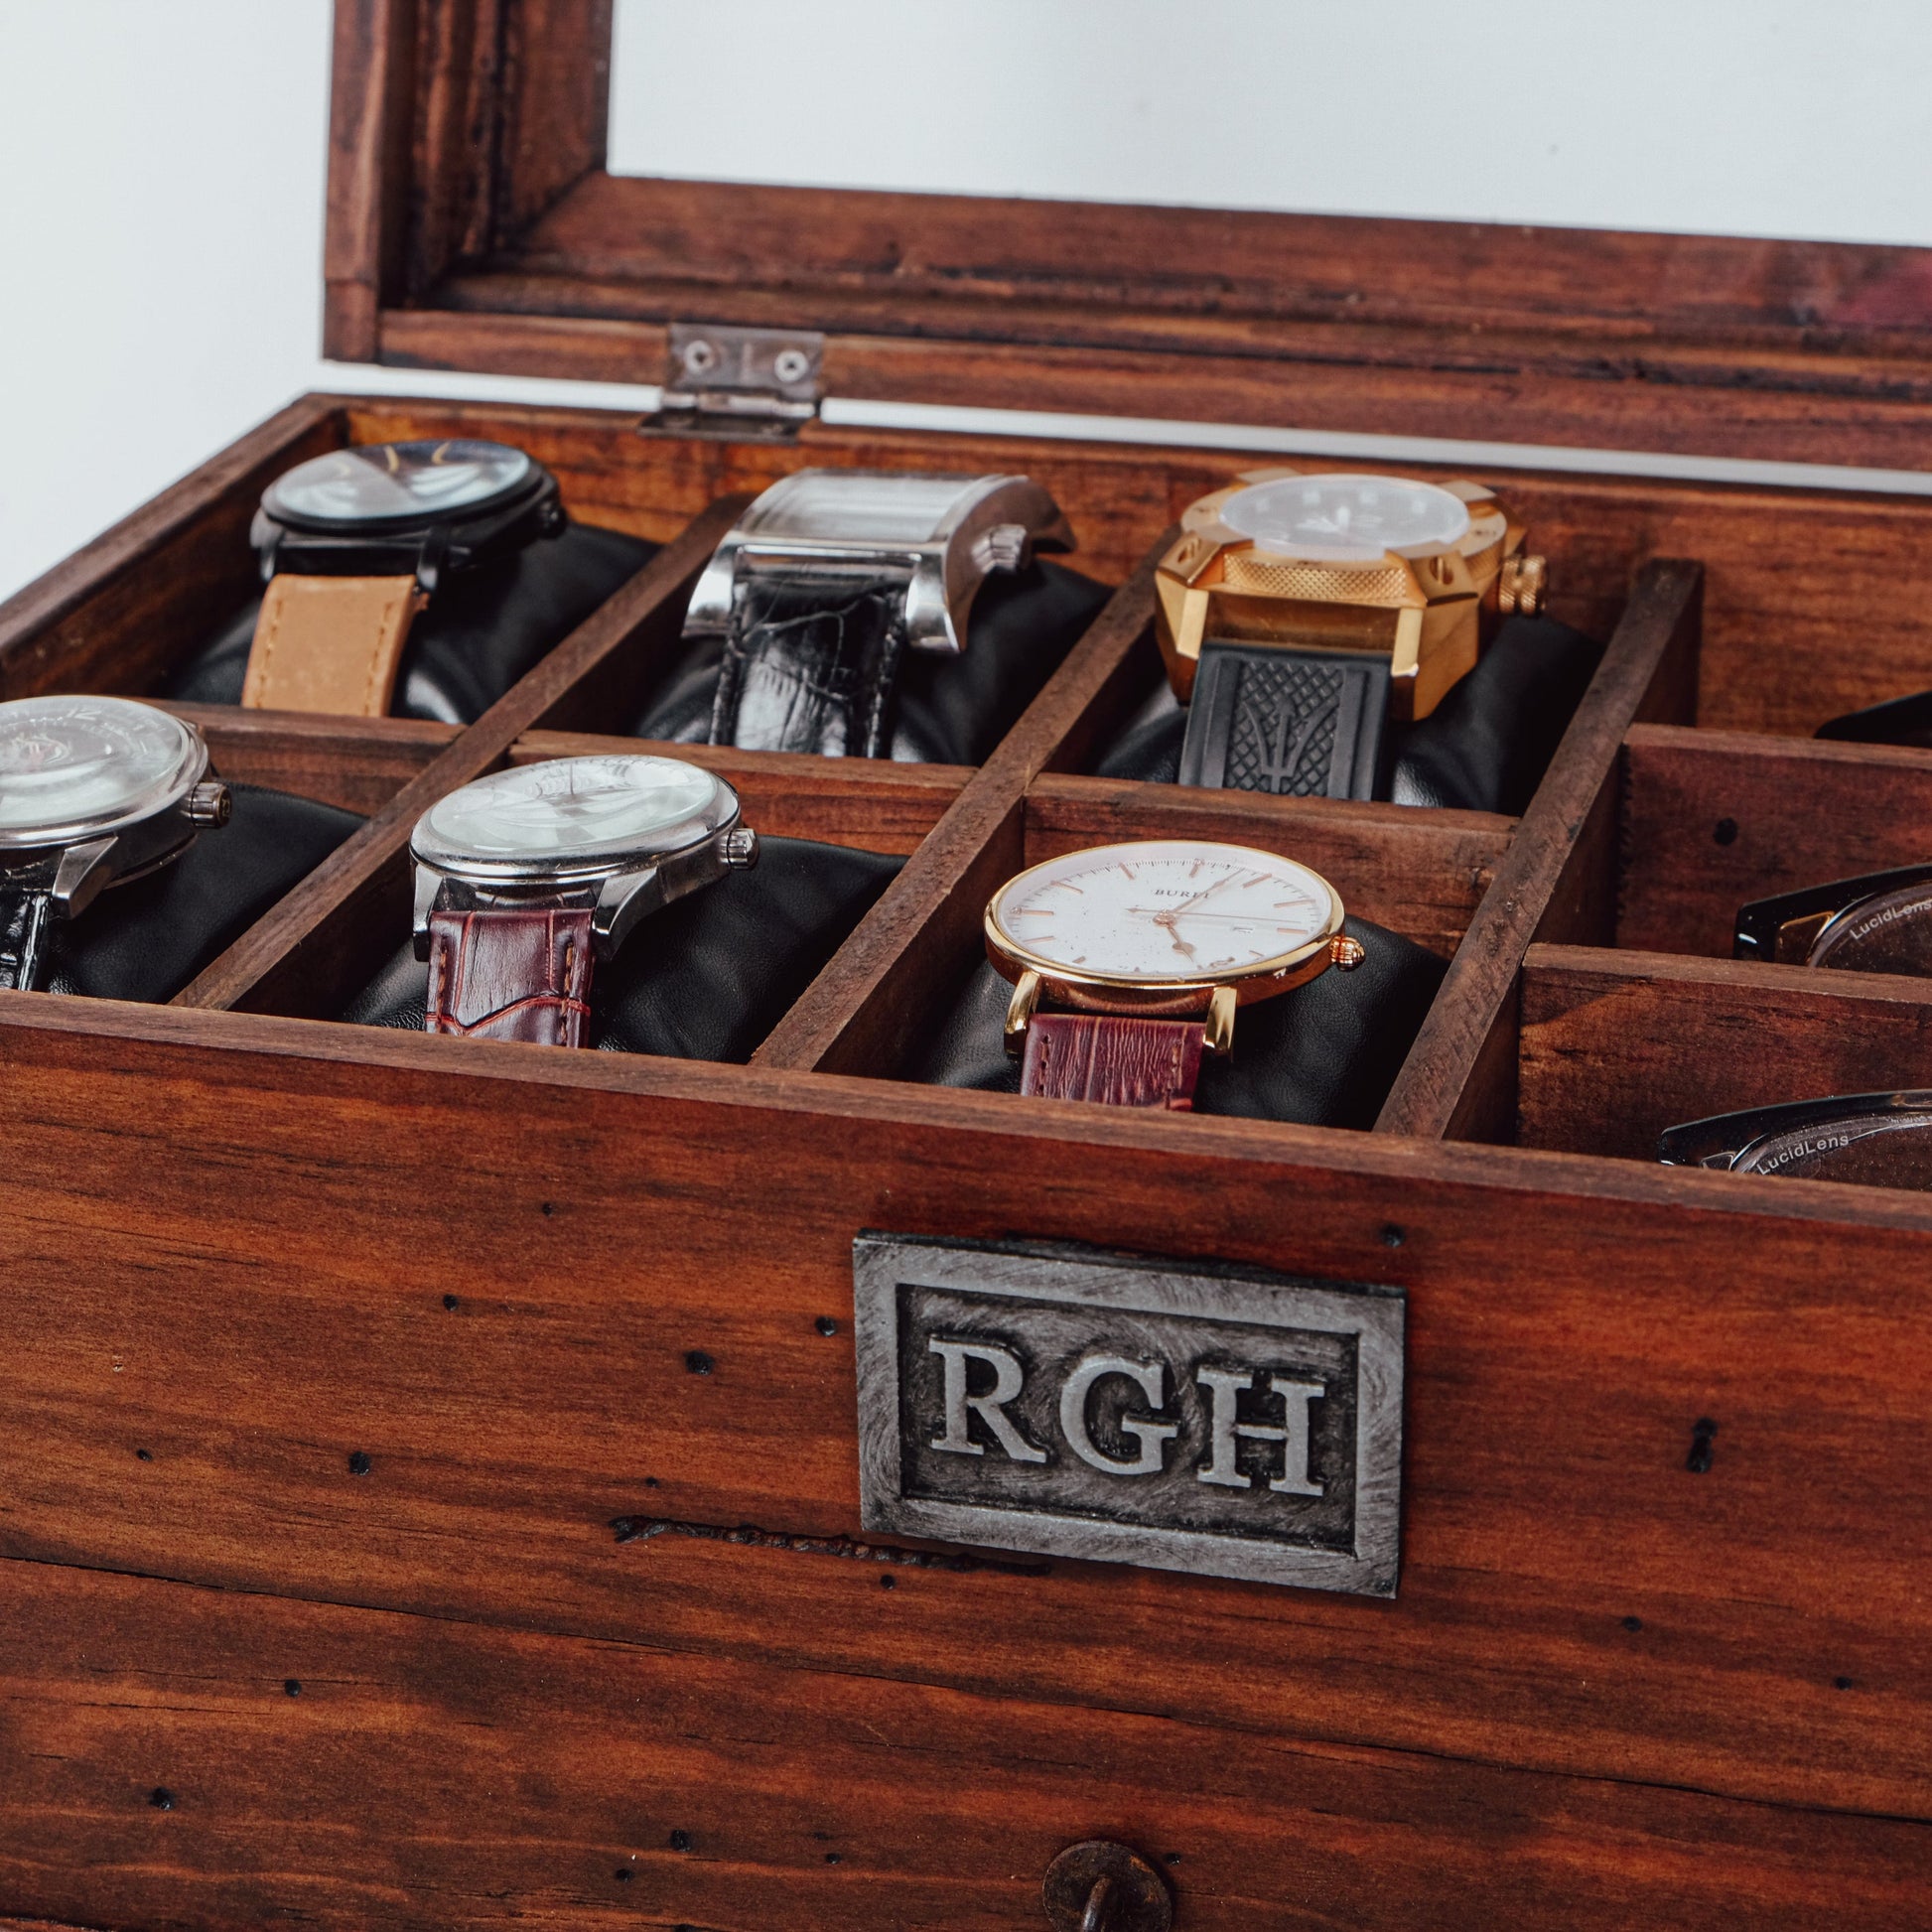 Watch Box and Sunglasses with Drawer No. 6-3 - Deferichs